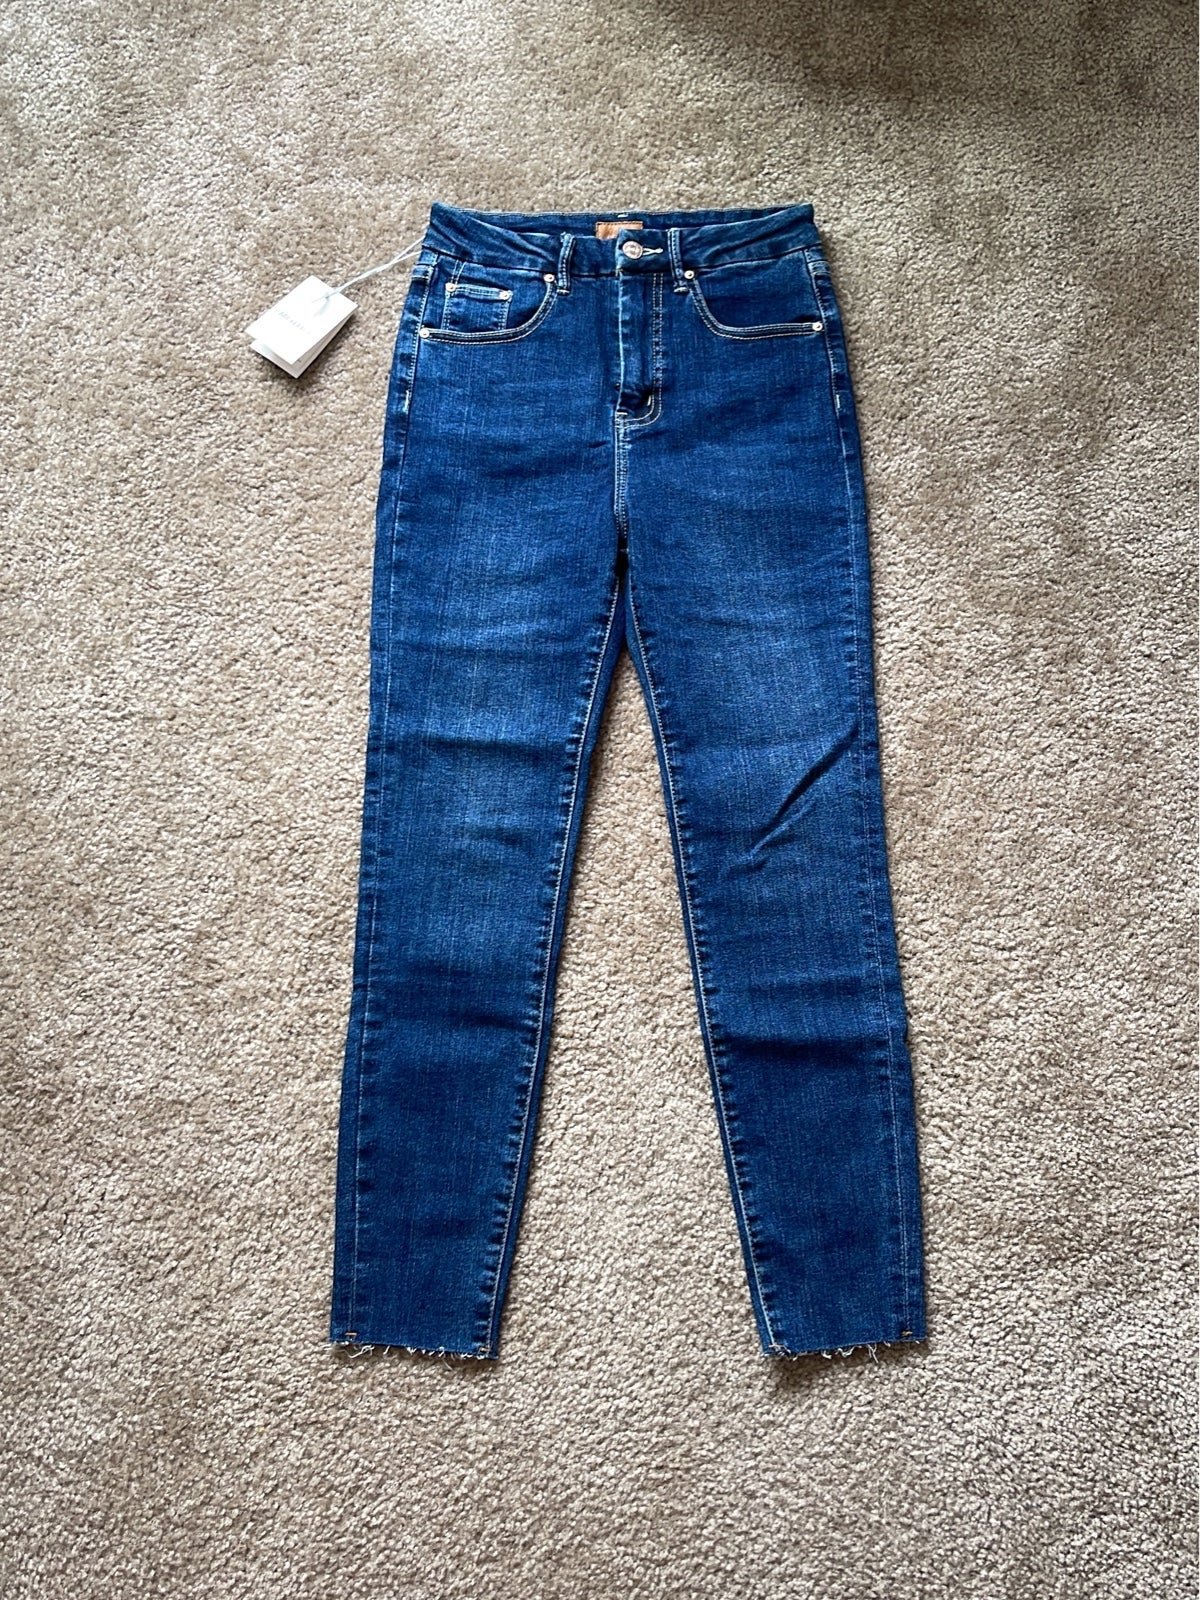 large discount NWT Mother Skinny Jeans Size 26 gboLq9qX